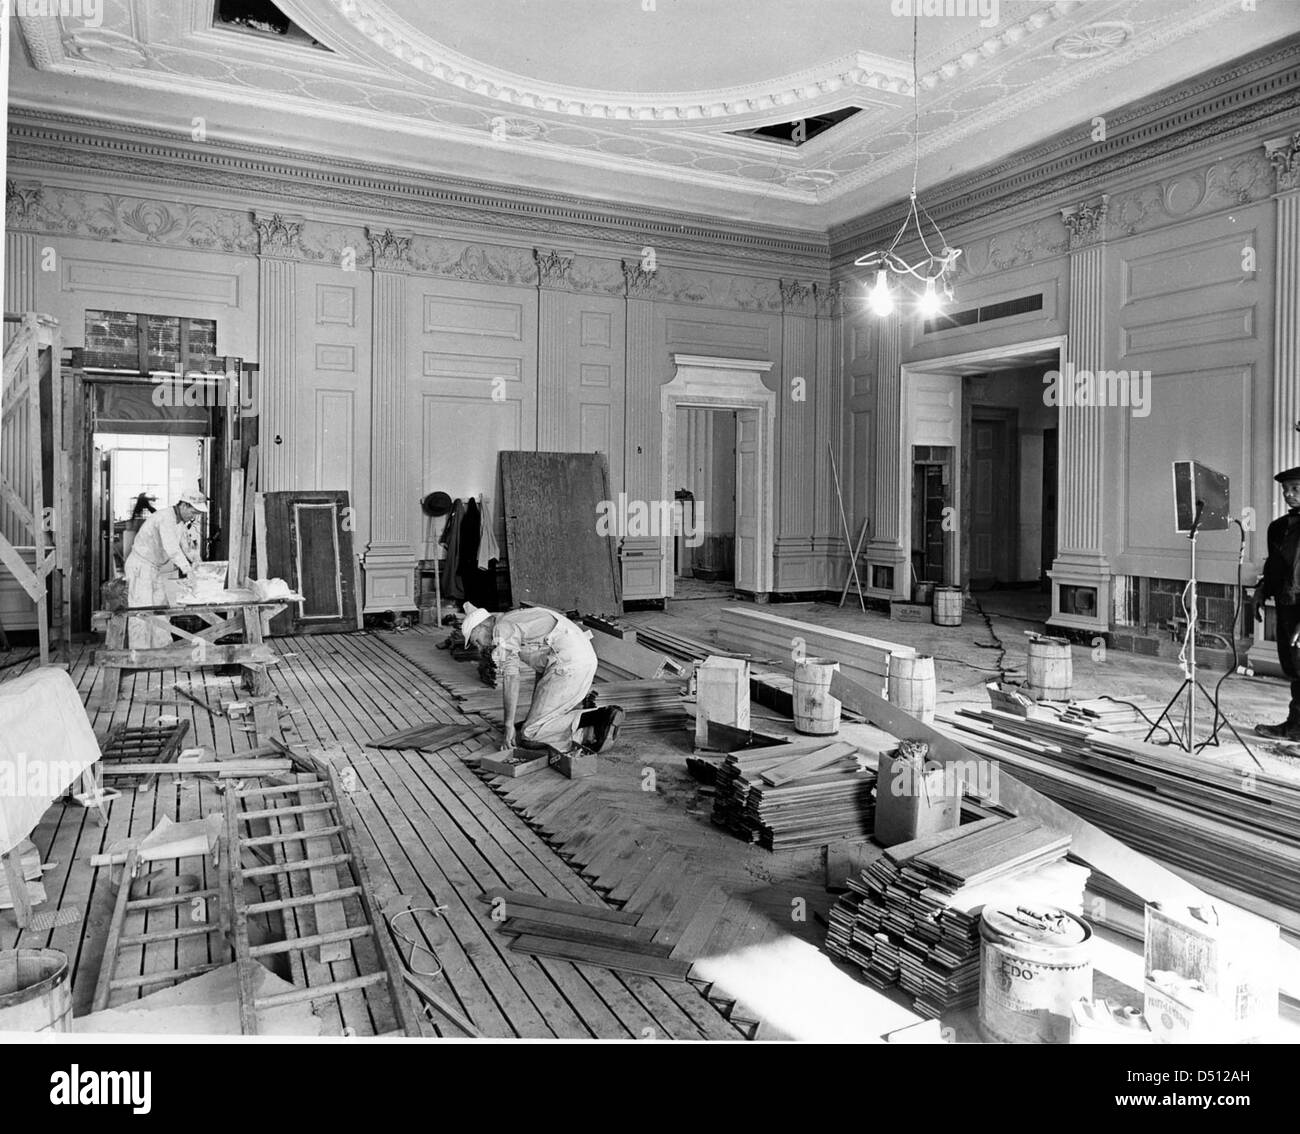 Northeast View of the State Dining Room during the White House Renovation, 01/23/1952 Stock Photo